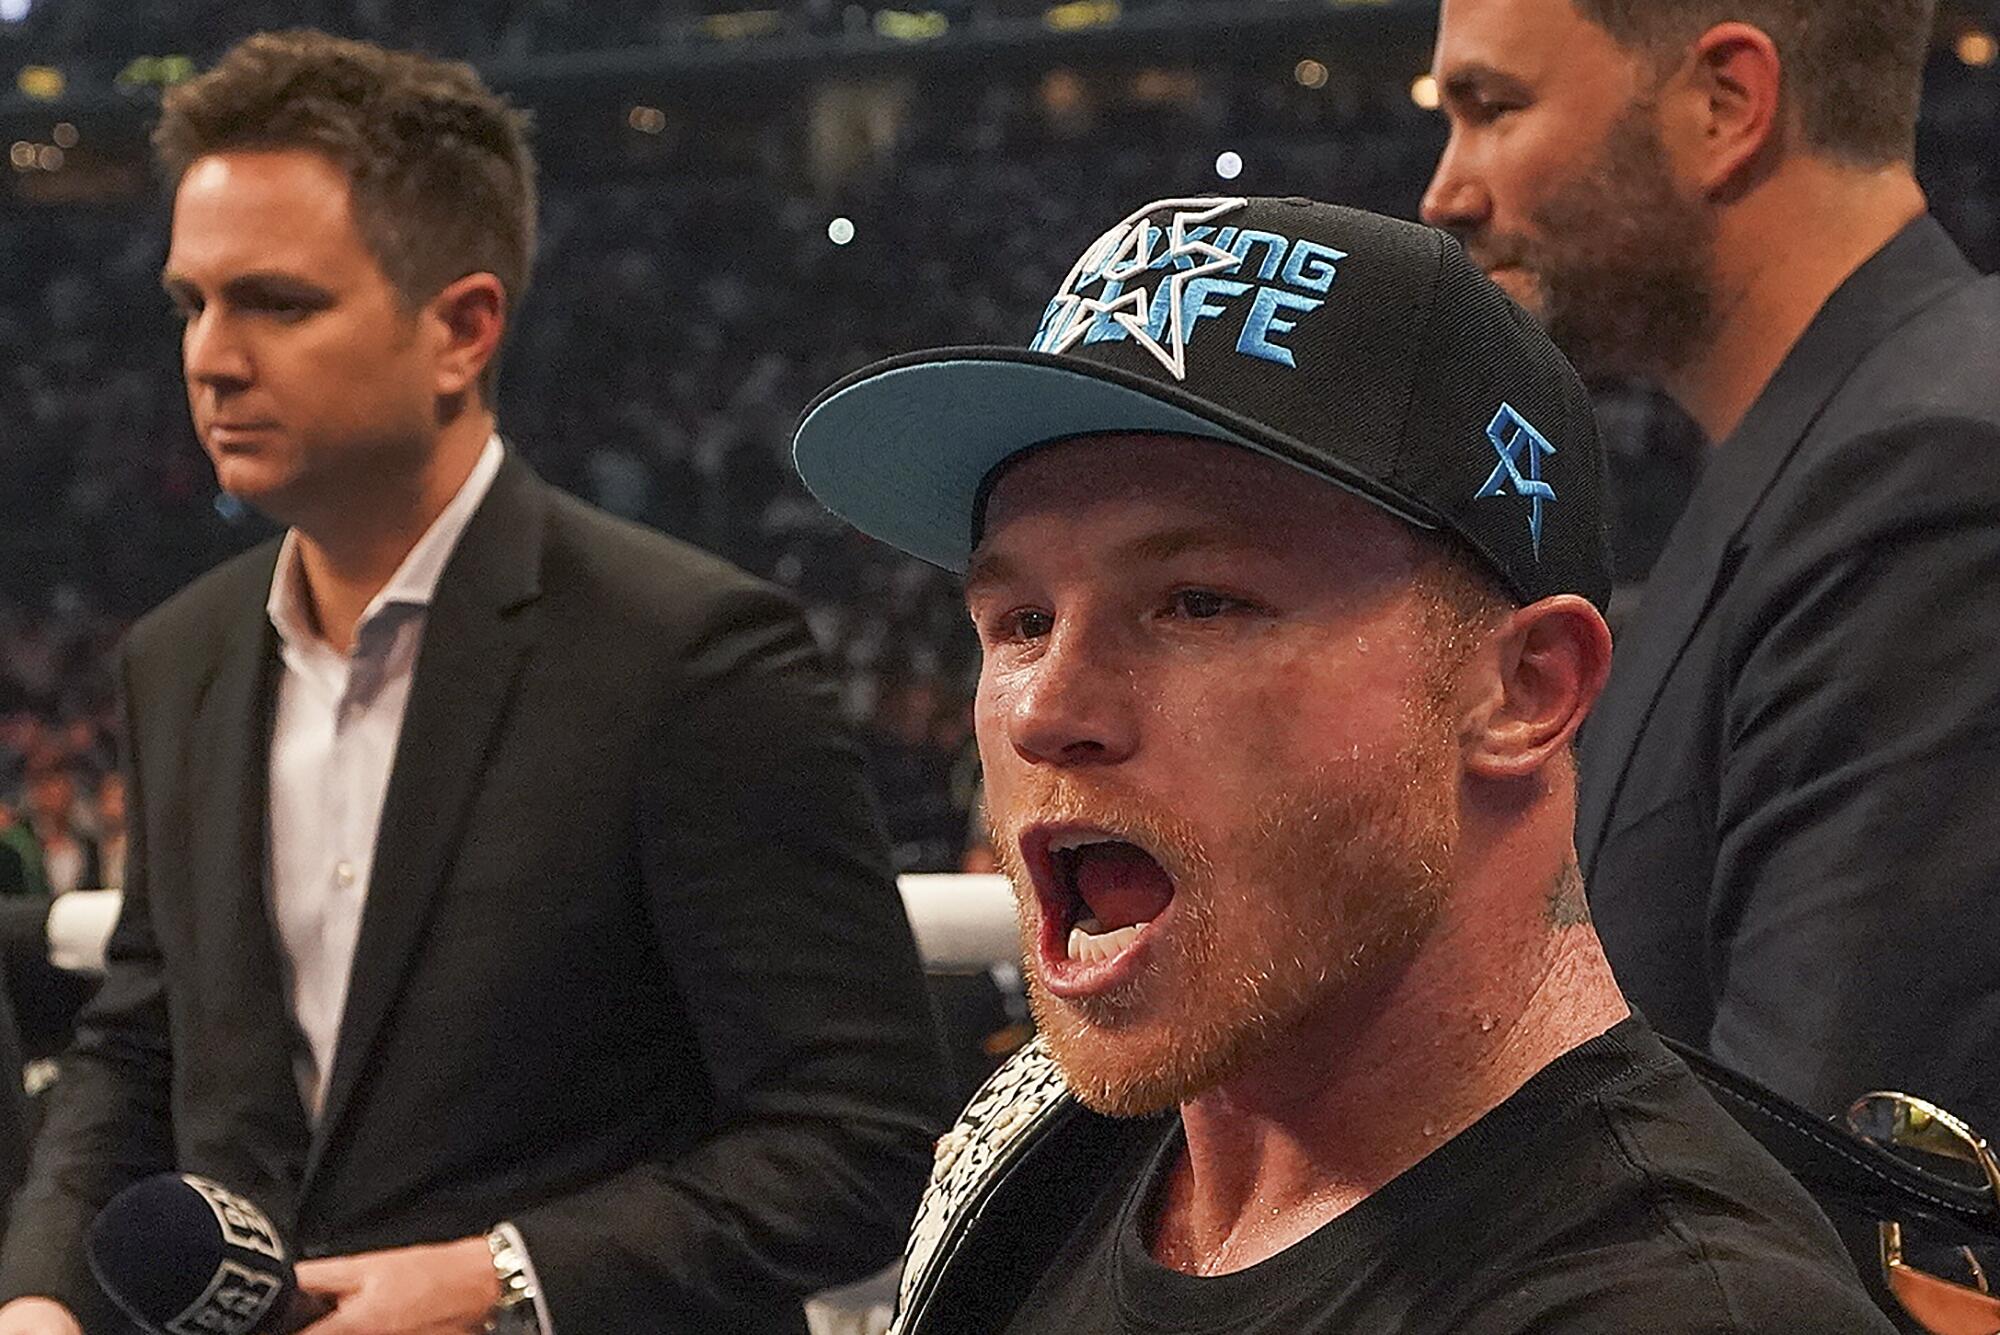 Canelo Álvarez, dressed in a black T-shirt and hat, with his mouth open